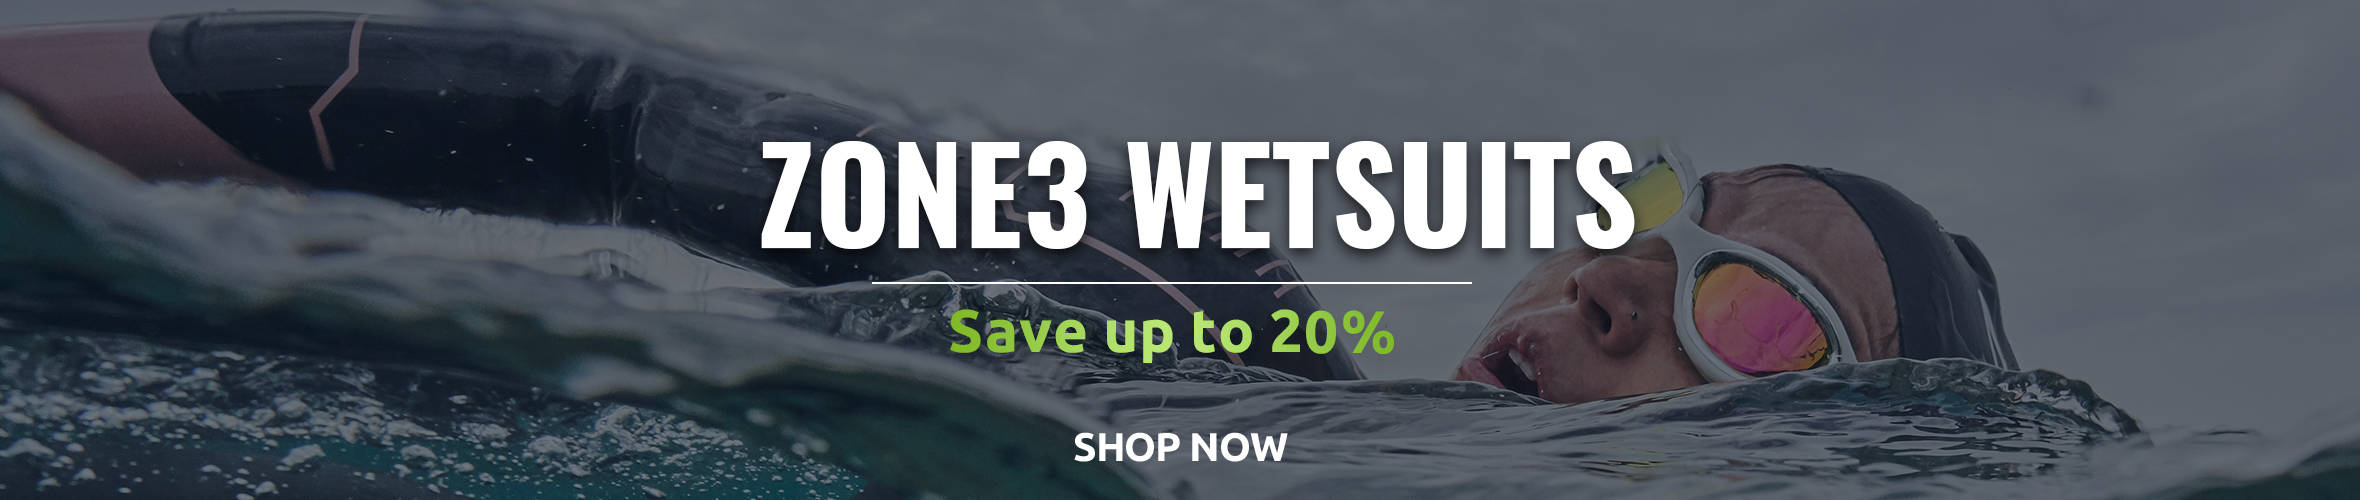 Zone3 Wetsuits - Save upto 20%